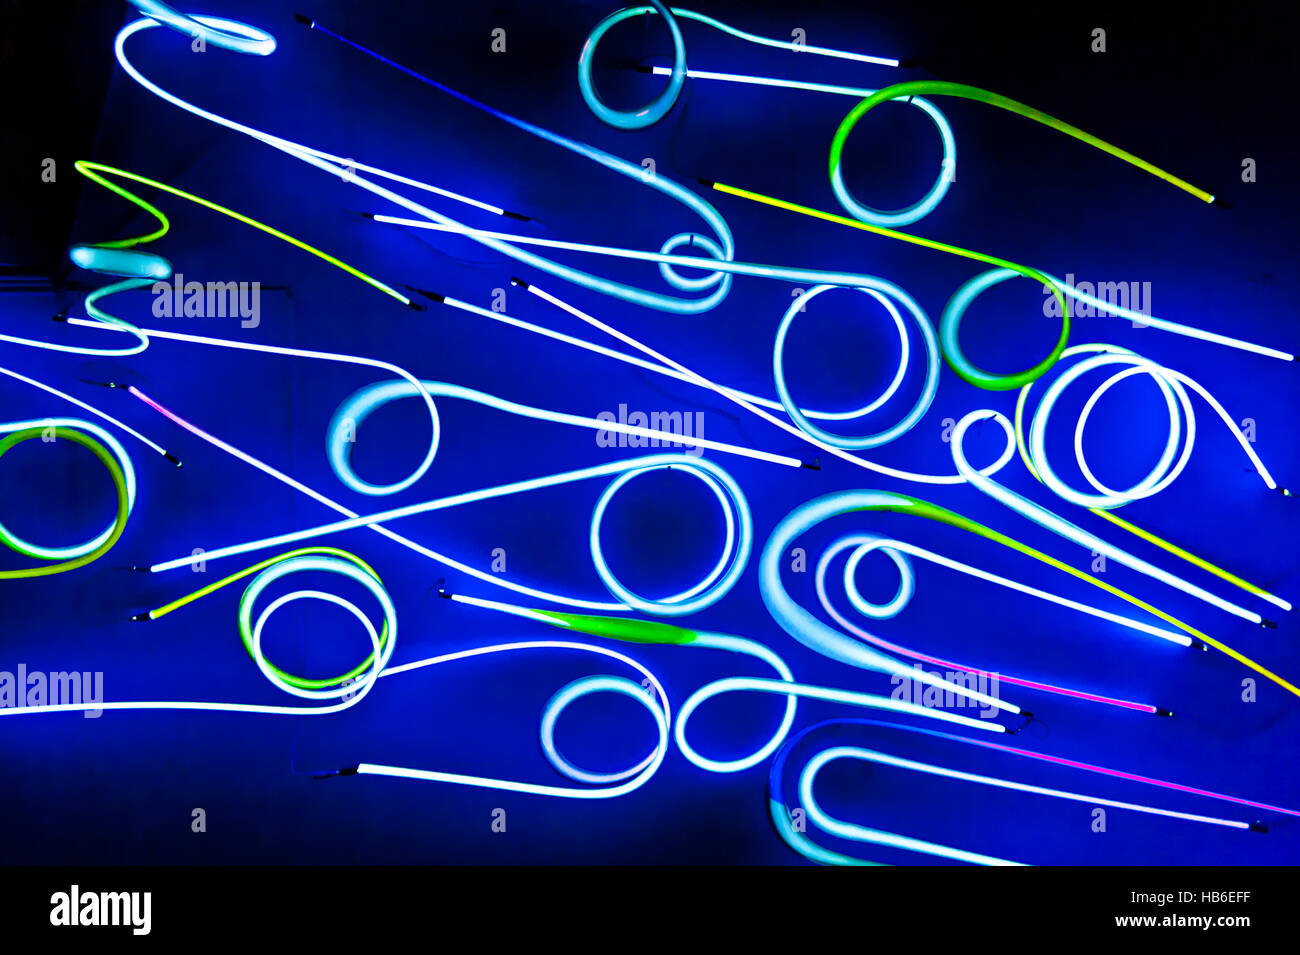 Abstract neon light in different colors Stock Photo